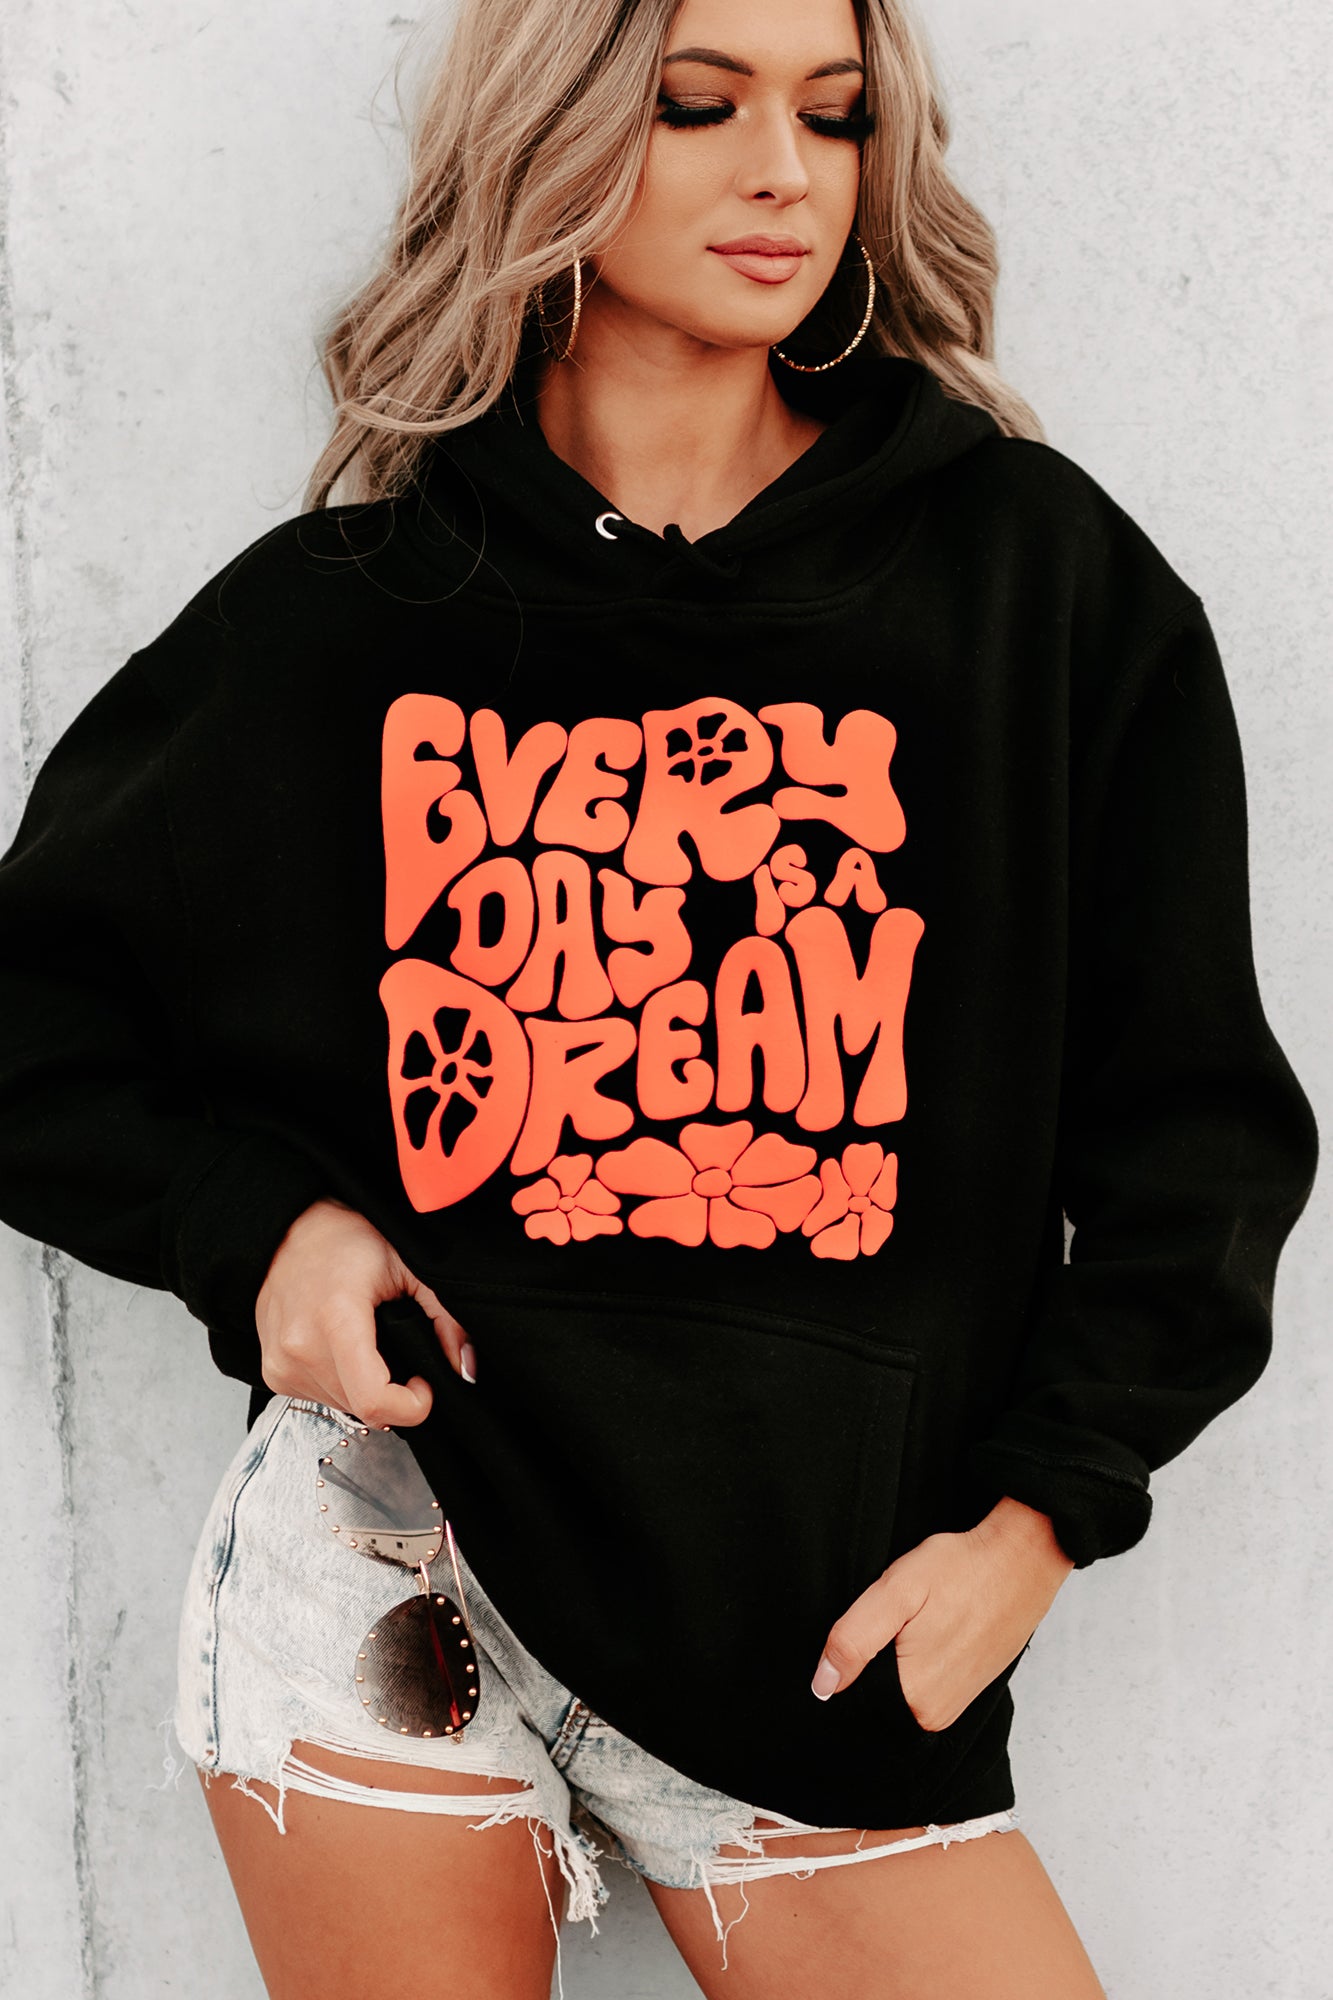 "Every Day Is A Dream" Puff Graphic Multiple Shirt Options (Black) - Print On Demand - NanaMacs